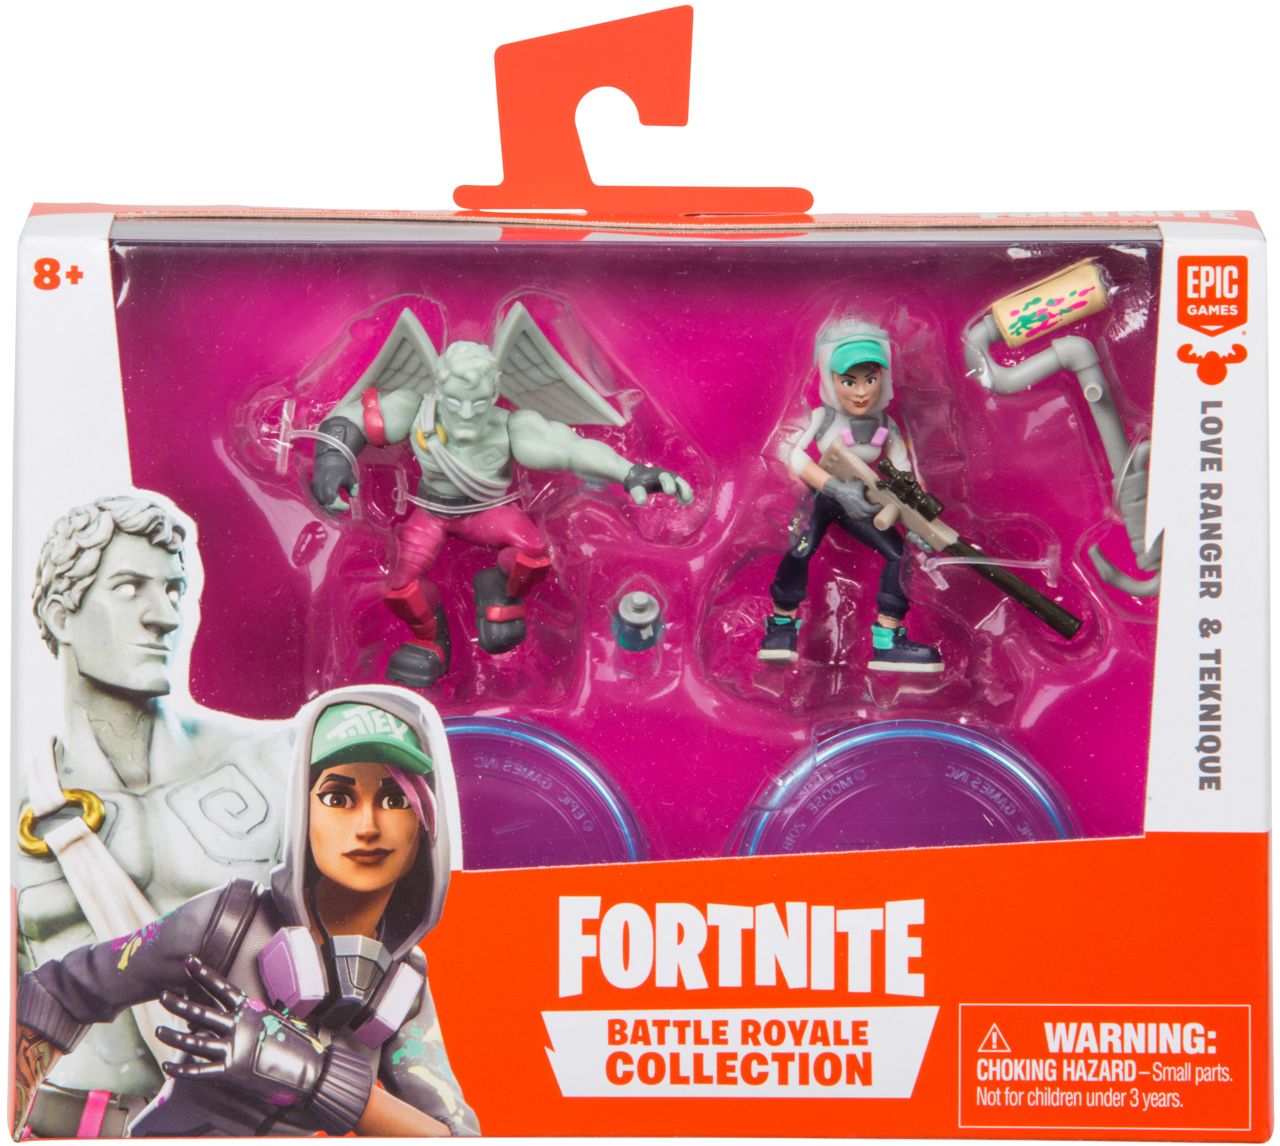 Fortnite 63511 Battle Royale Collection Mega Fort and 2 Exclusive